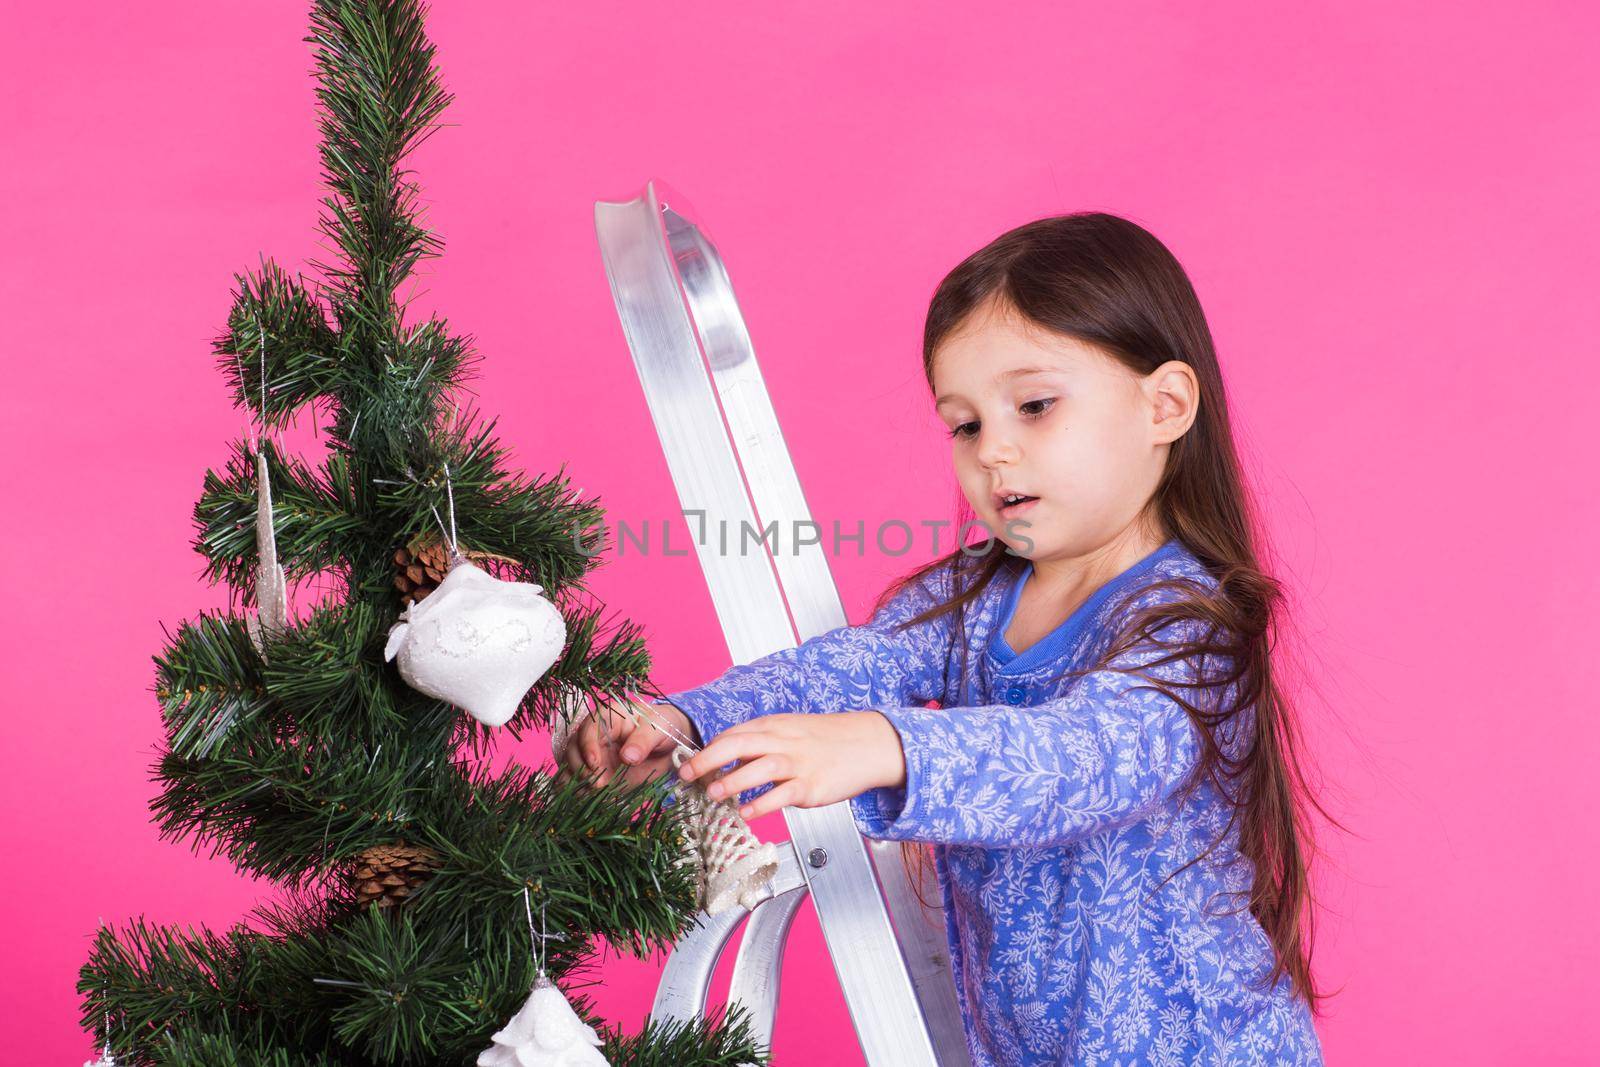 Little girl with christmas tree on pink background by Satura86